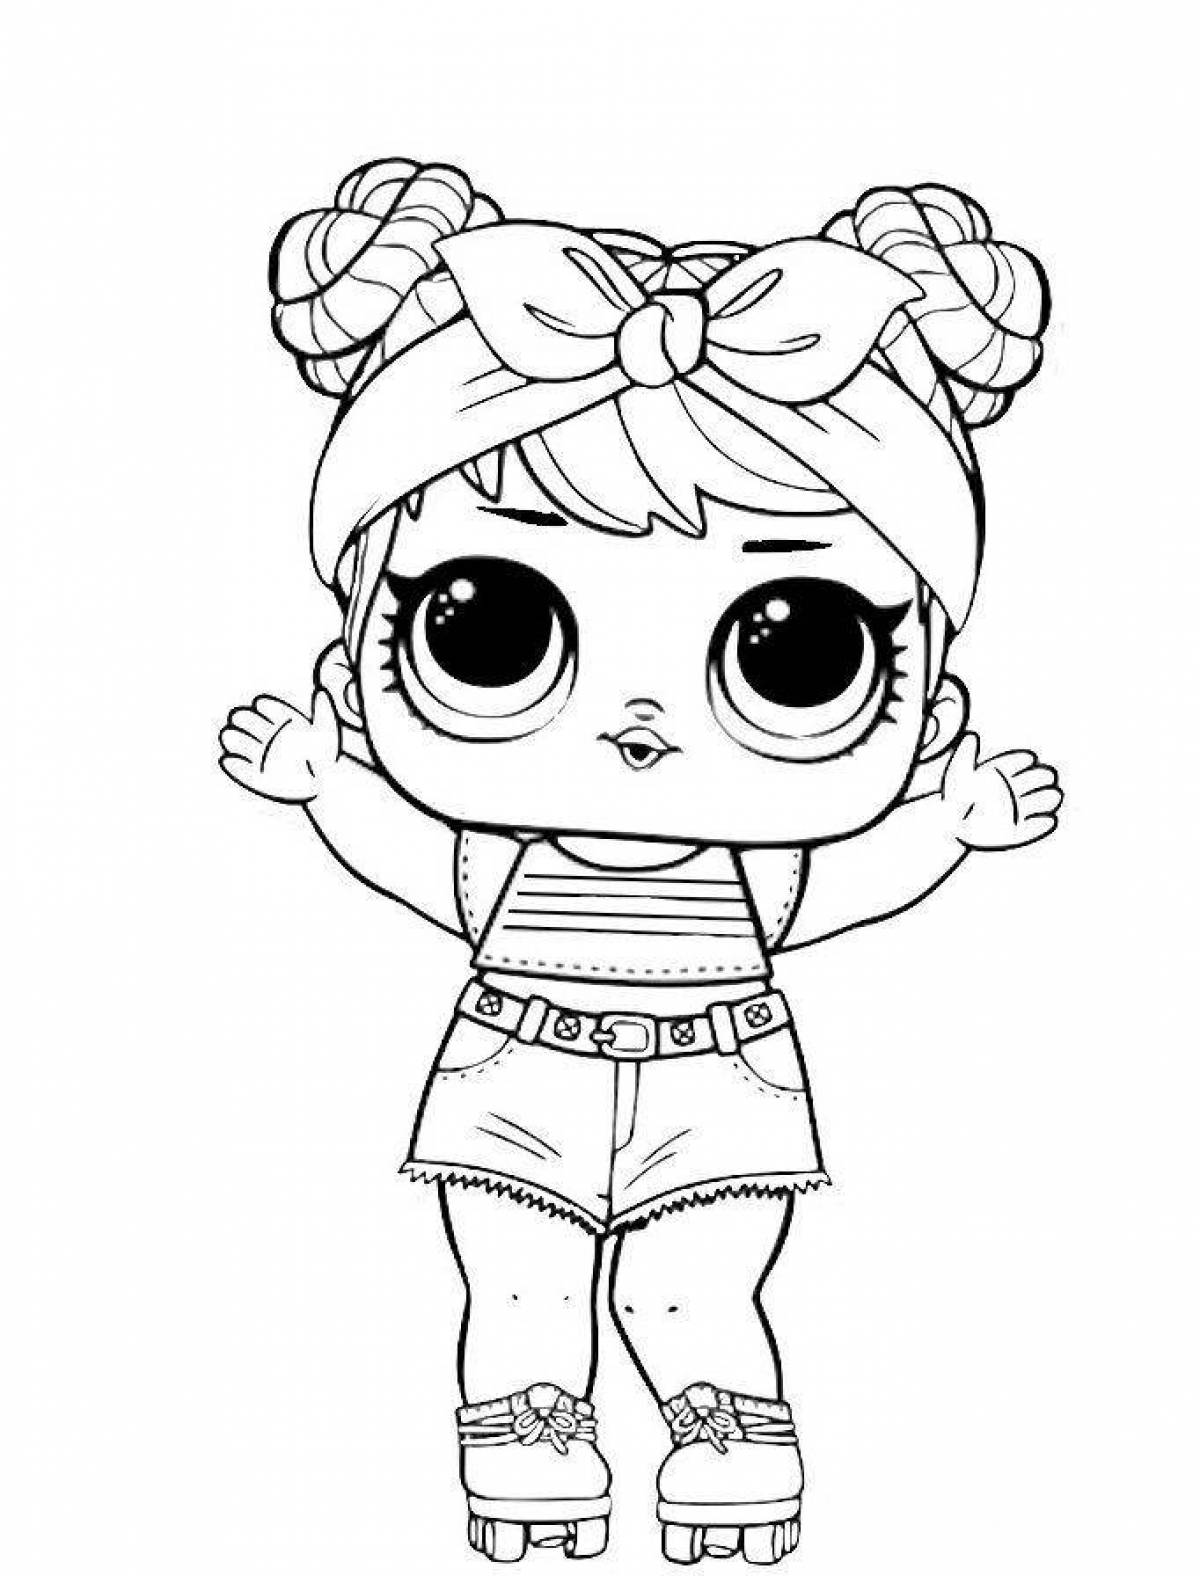 Color frenzy coloring page lol doll